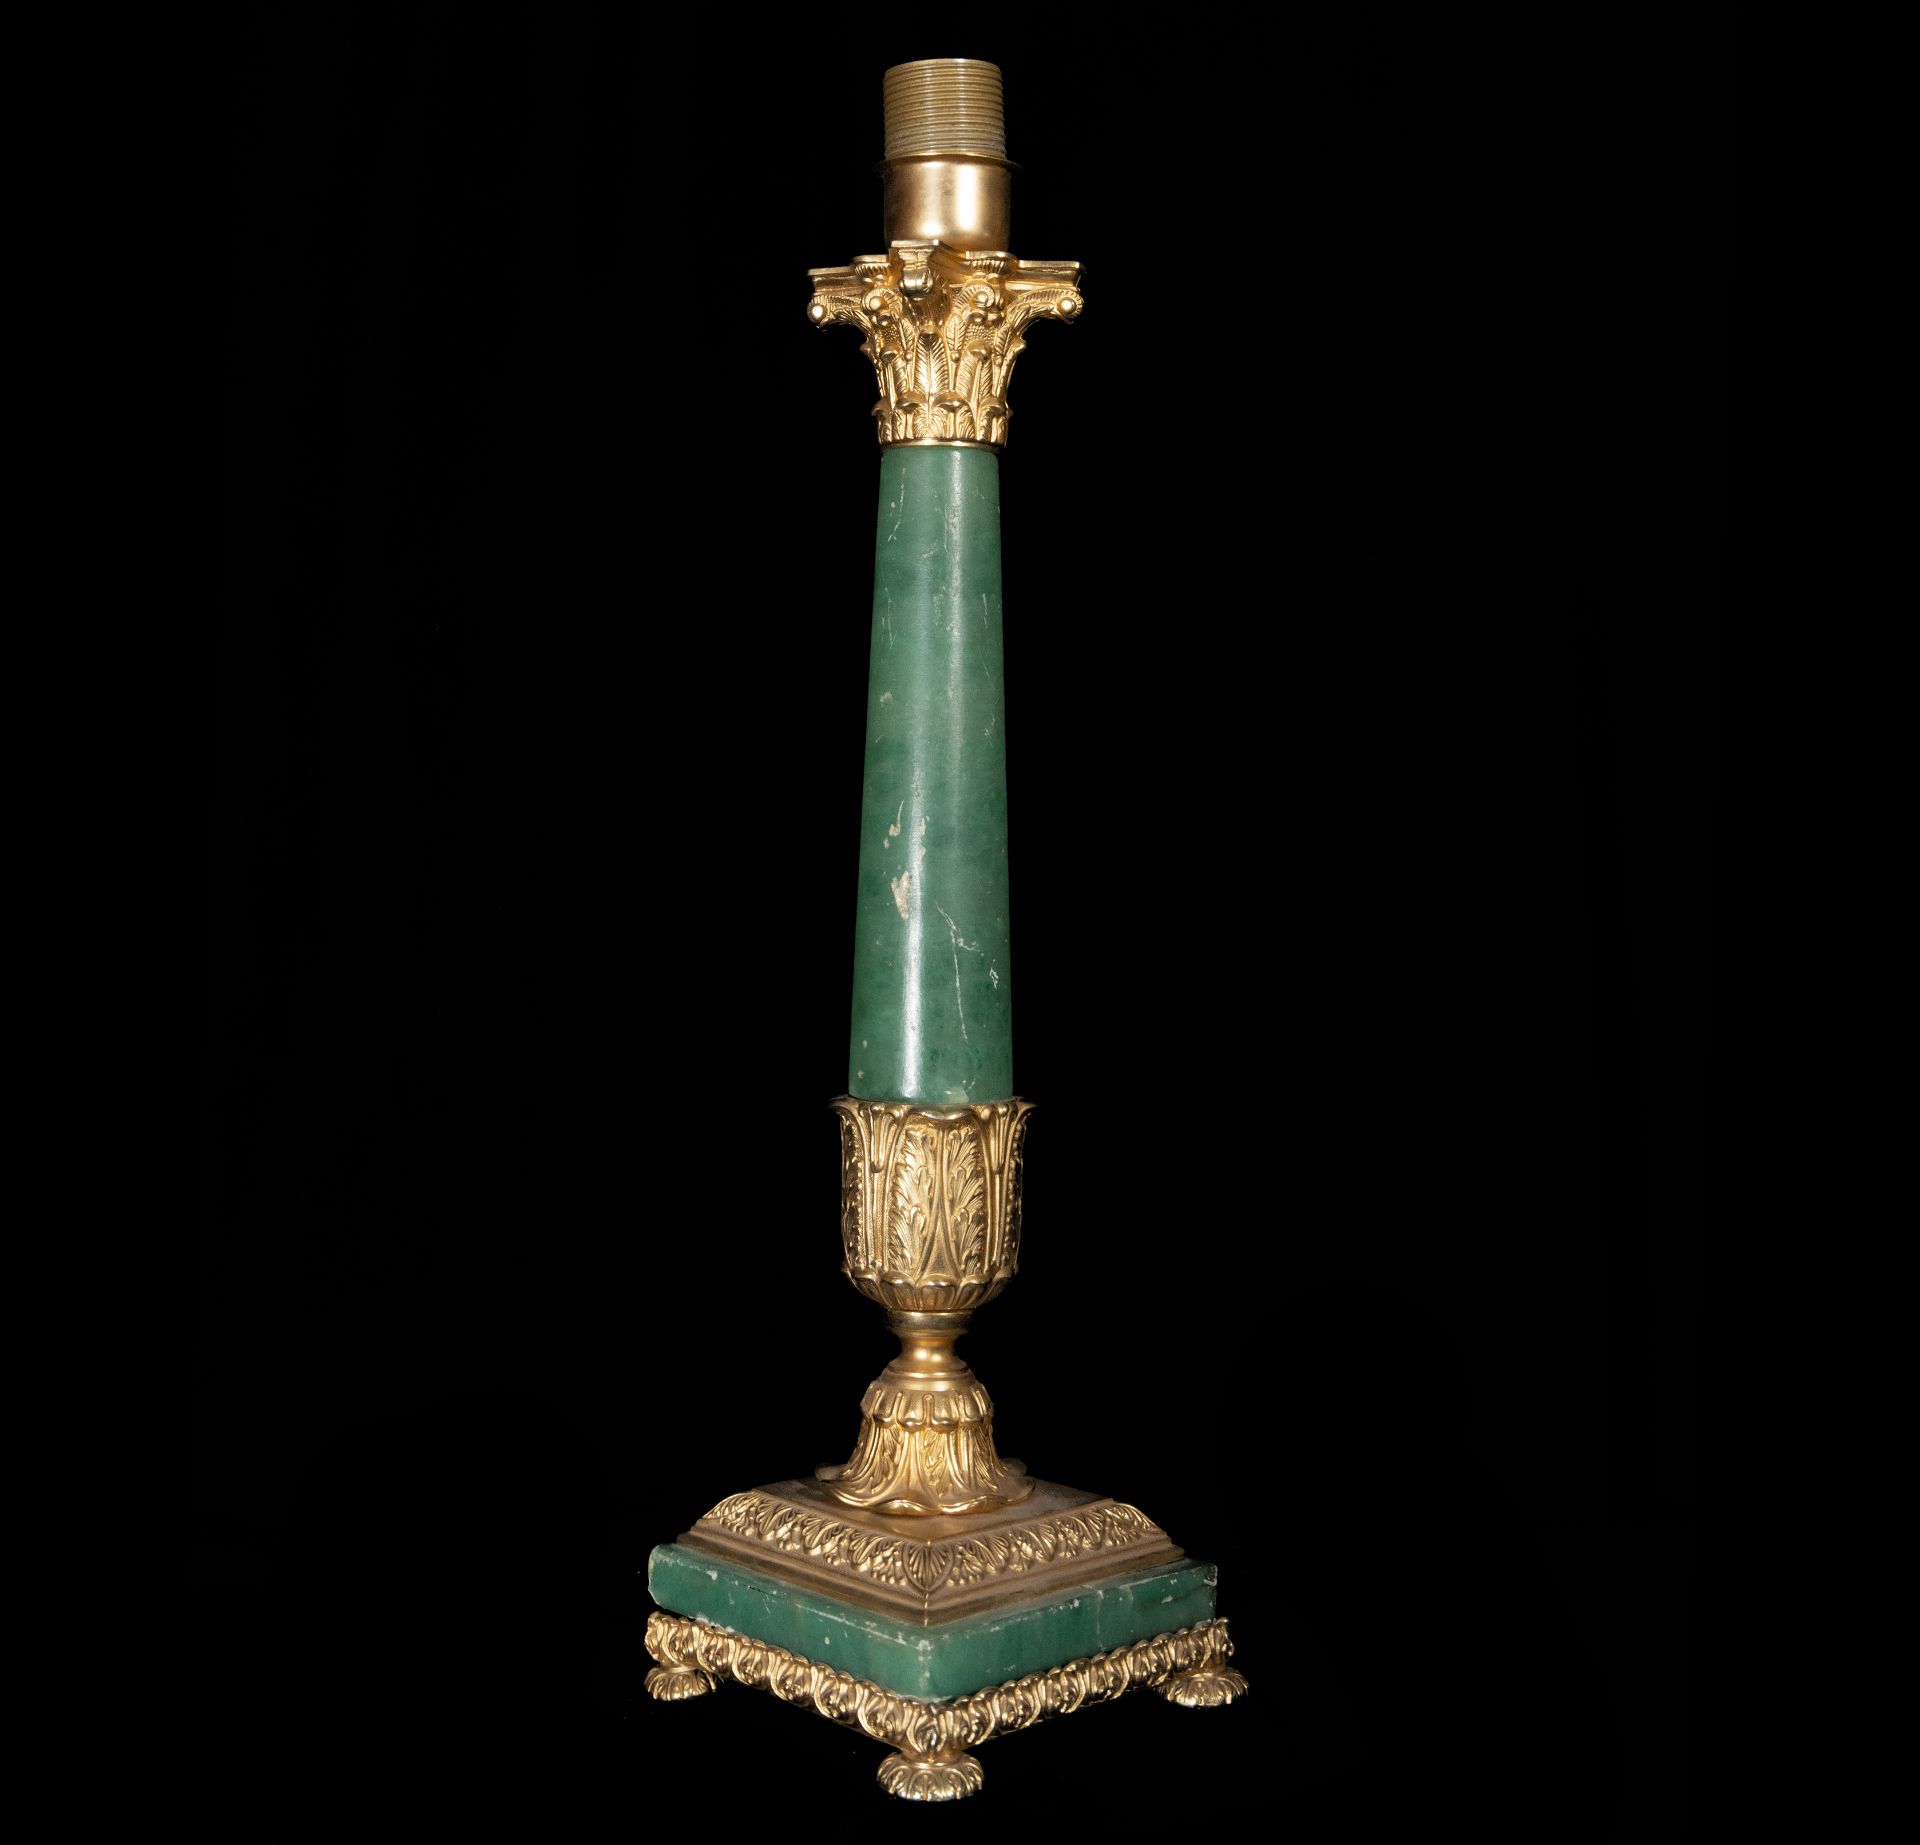 Pair of Empire Lamps in Onyx and mercury-gilded bronze, 19th century - Image 8 of 10